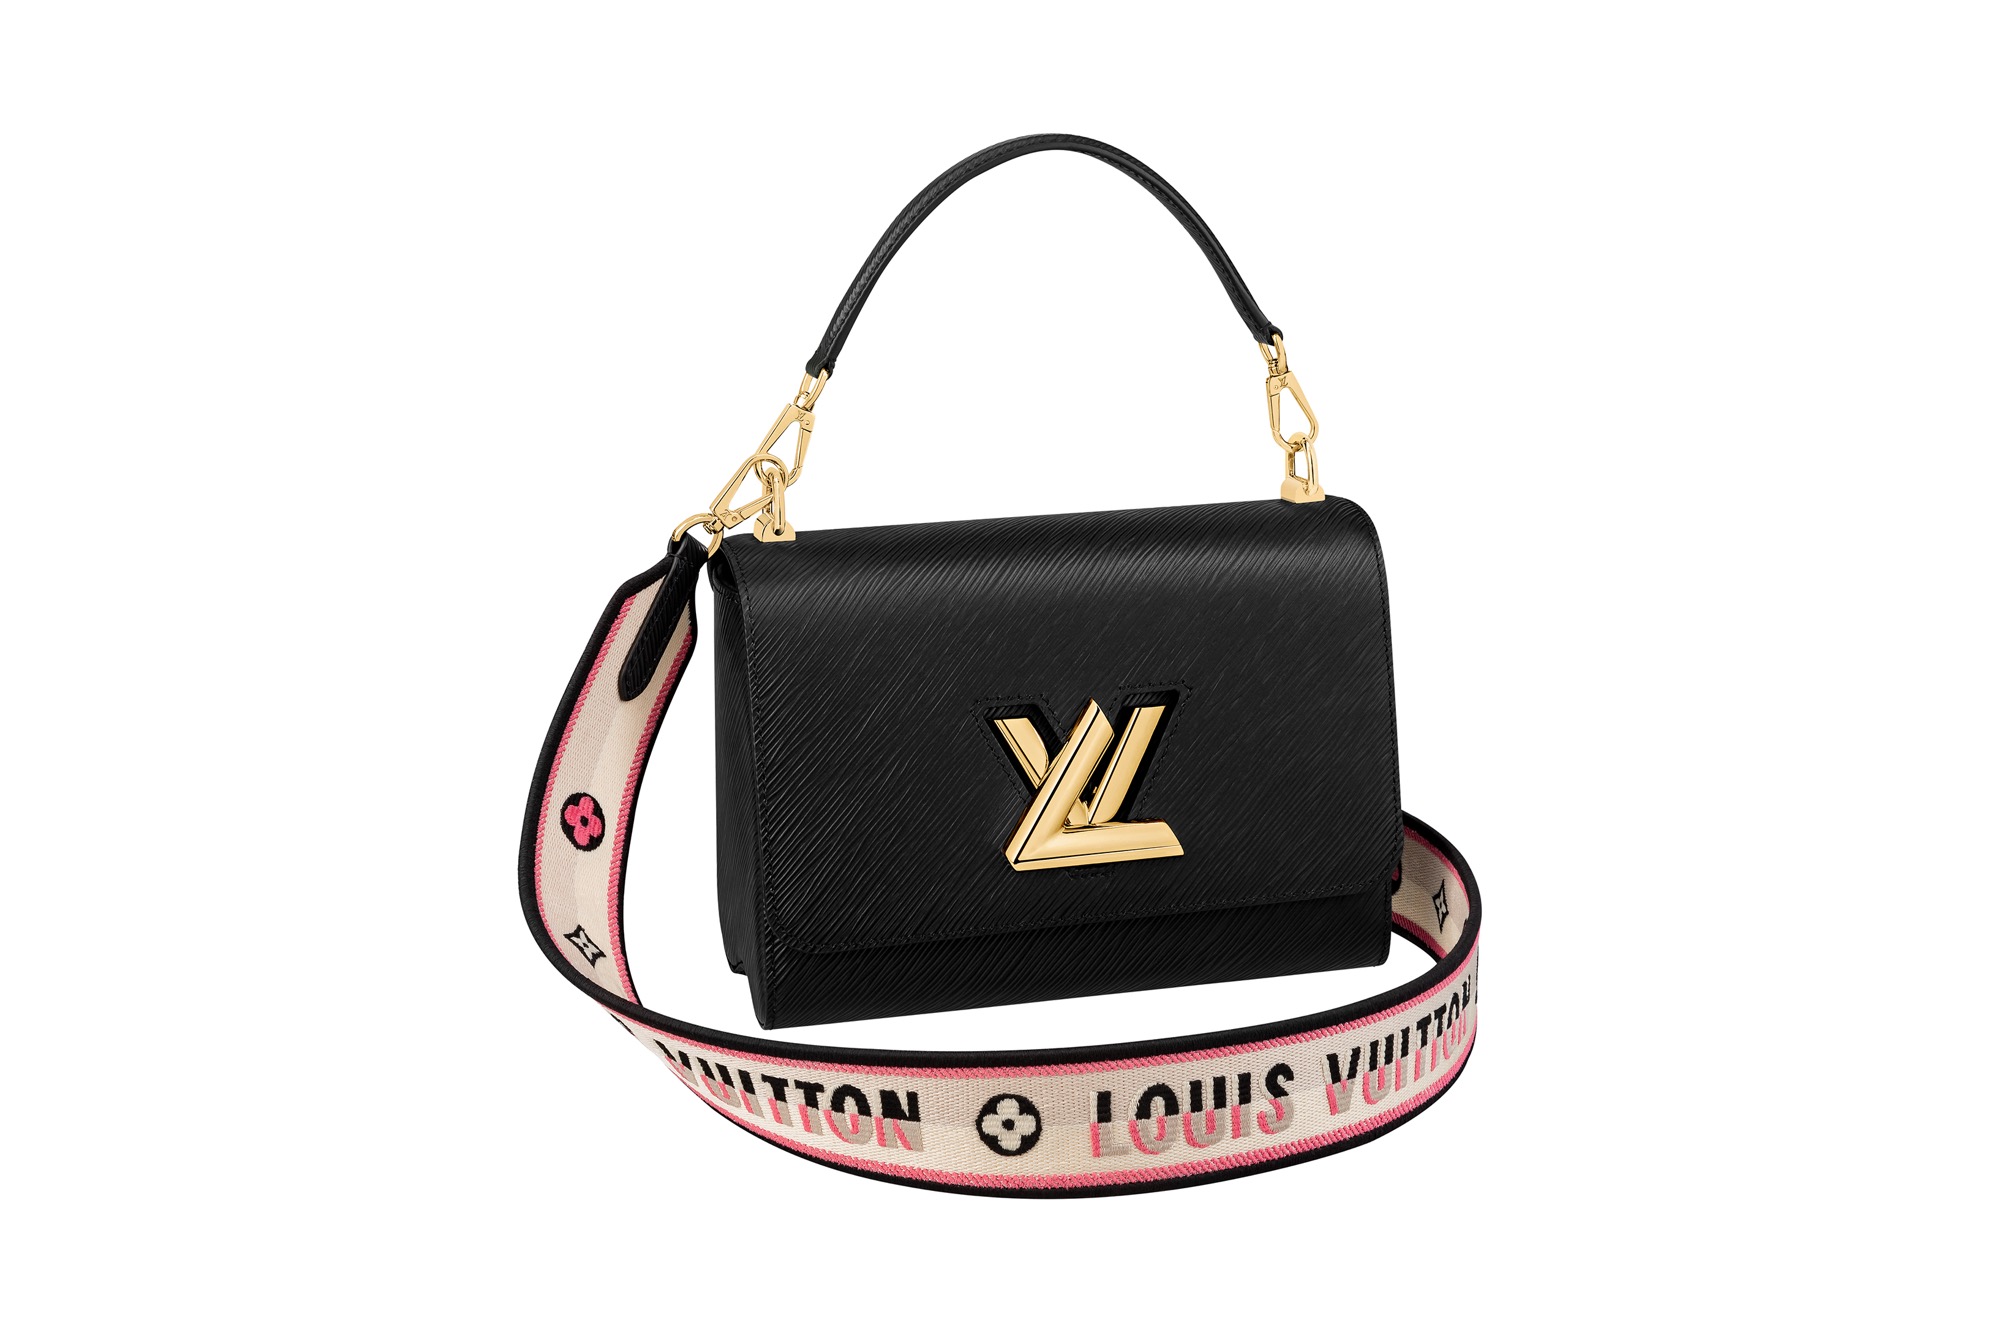 Louis Vuitton Offers A Fresh Take On Their Iconic Twist Bag For